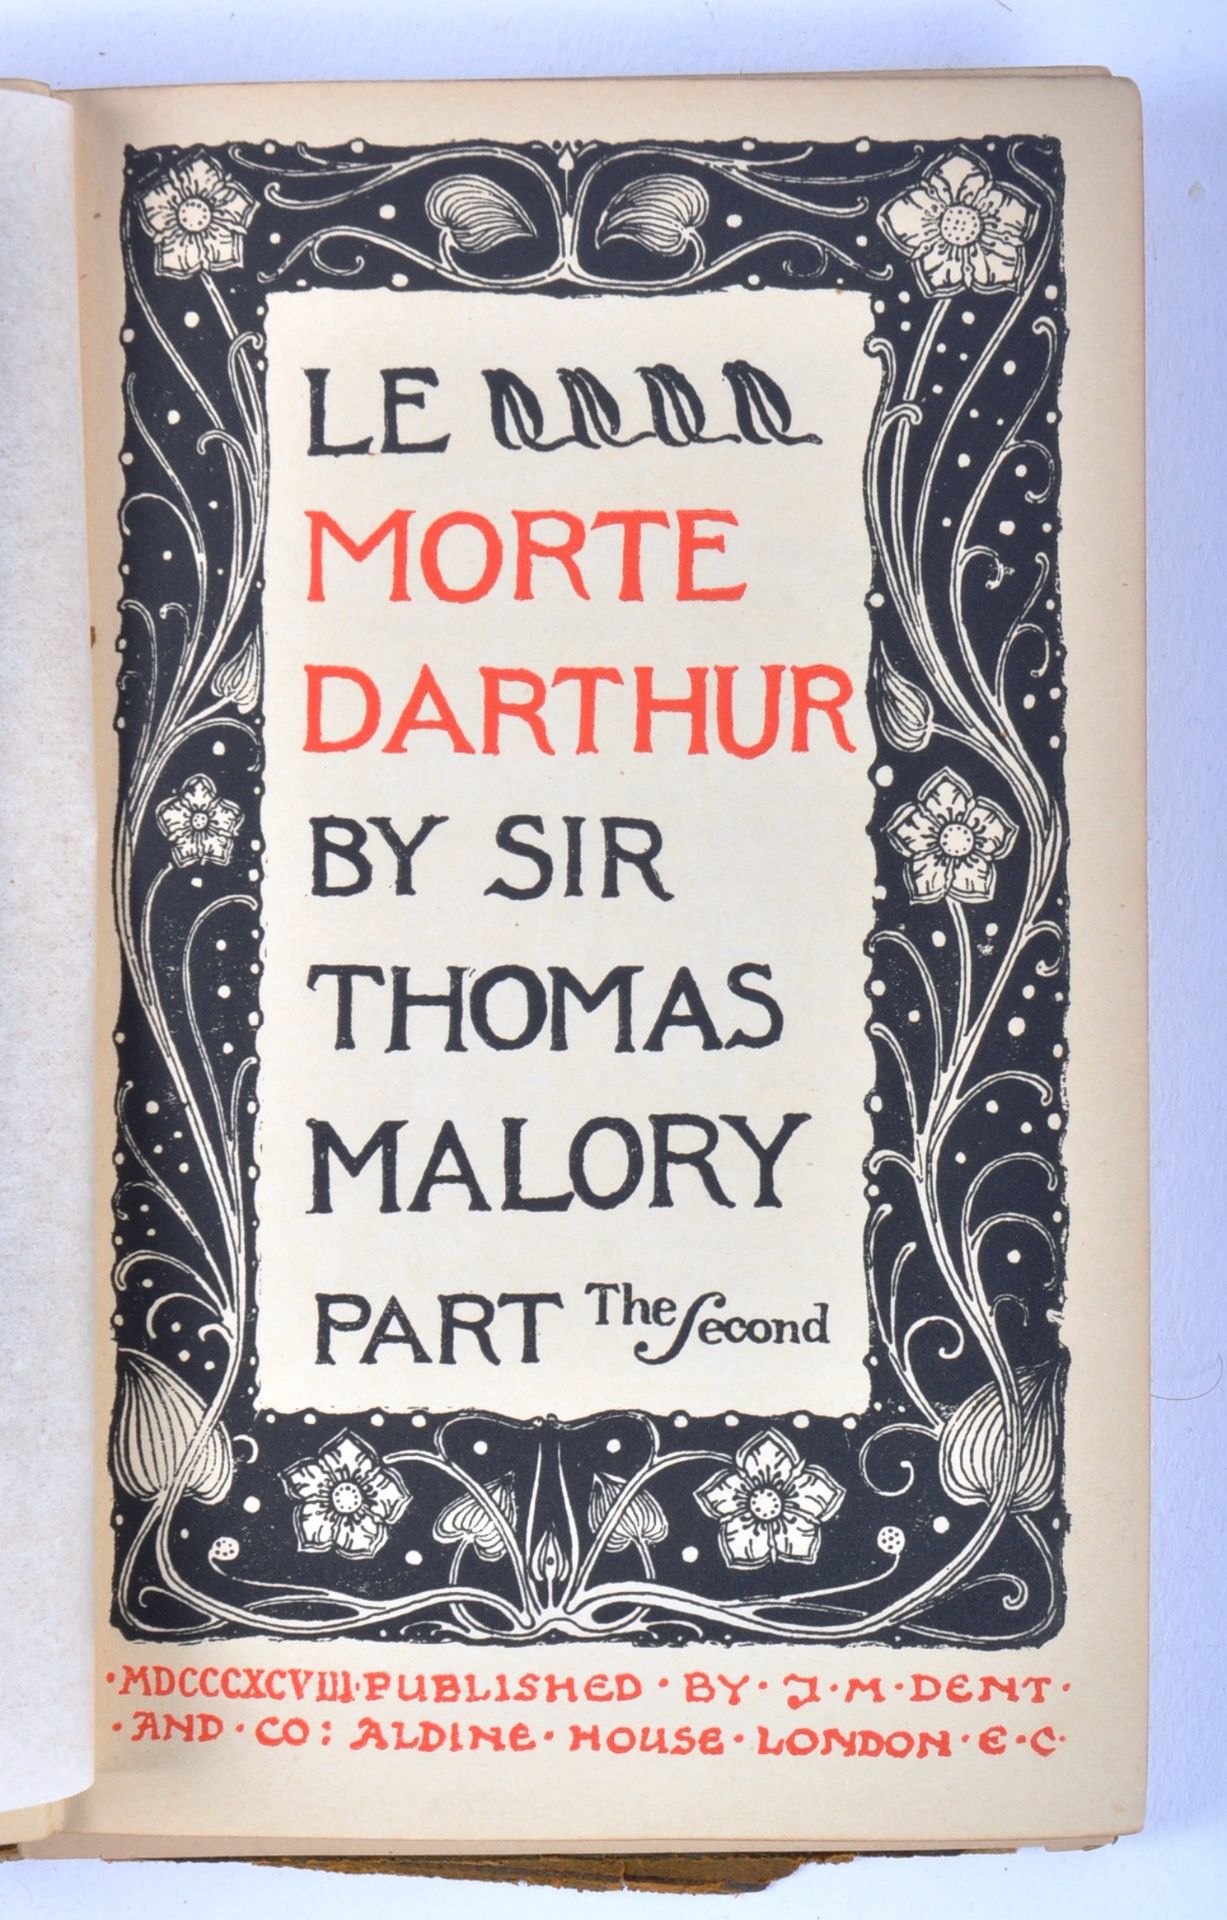 COLLECTION OF 19TH / 20TH CENTURY FICTION BOOKS - Image 6 of 6